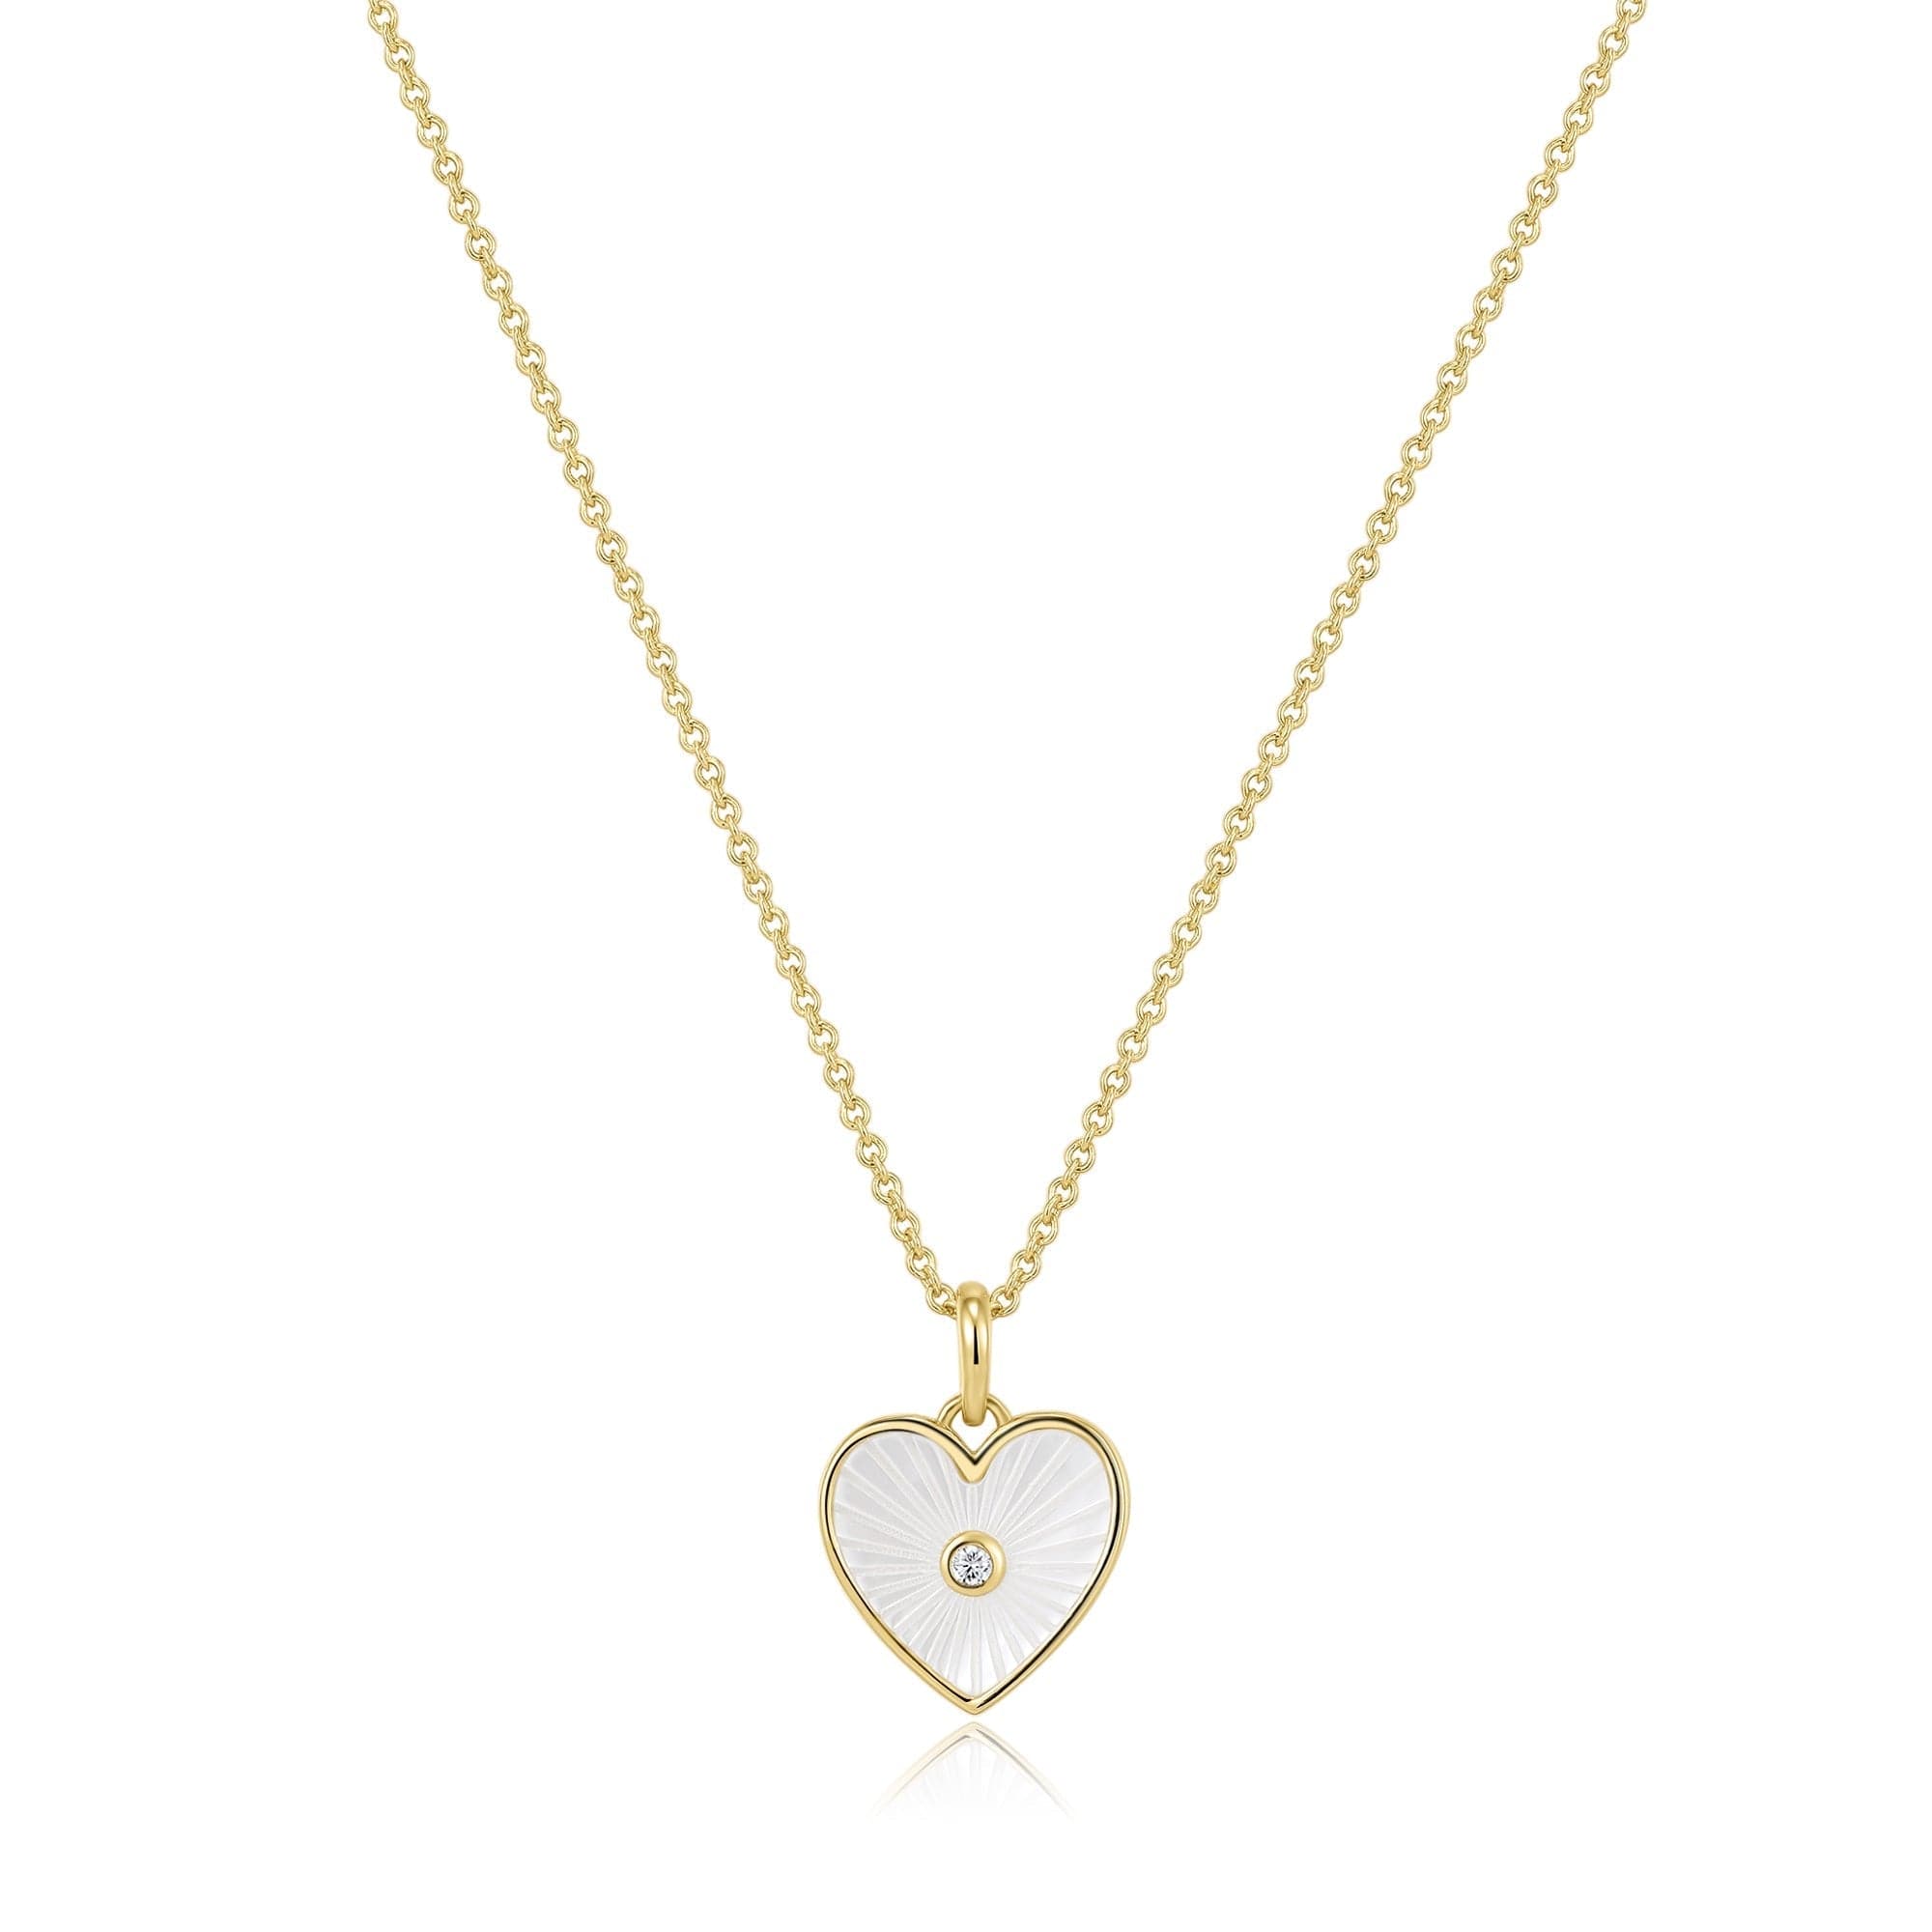 HEART SHAPED MOP PENDANT WITH CZ STONE NECKLACE